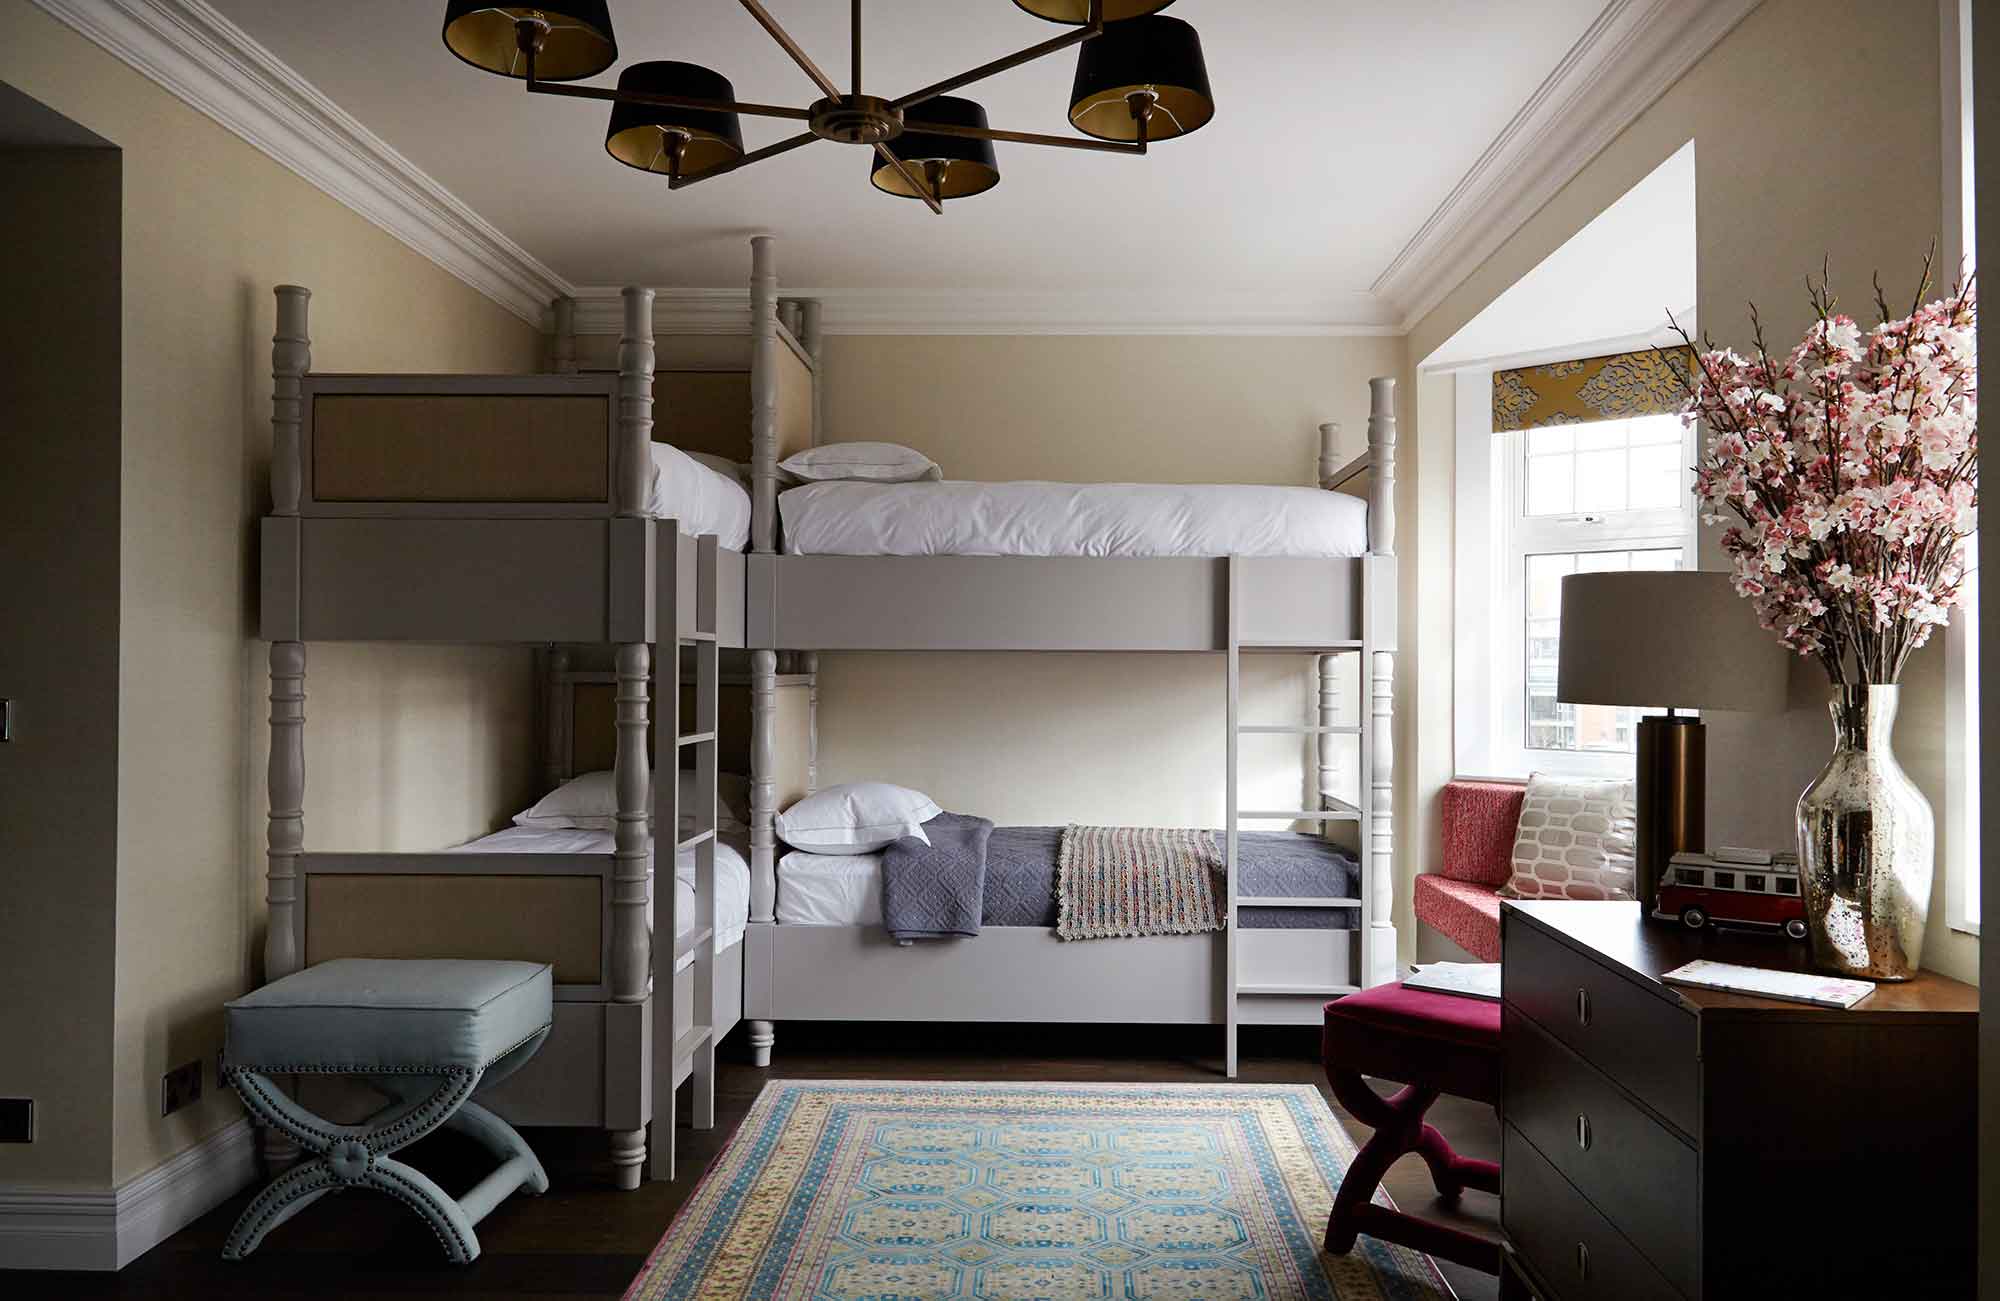 Bespoke bunkbeds and welled carpets make this room both delightful and practical 